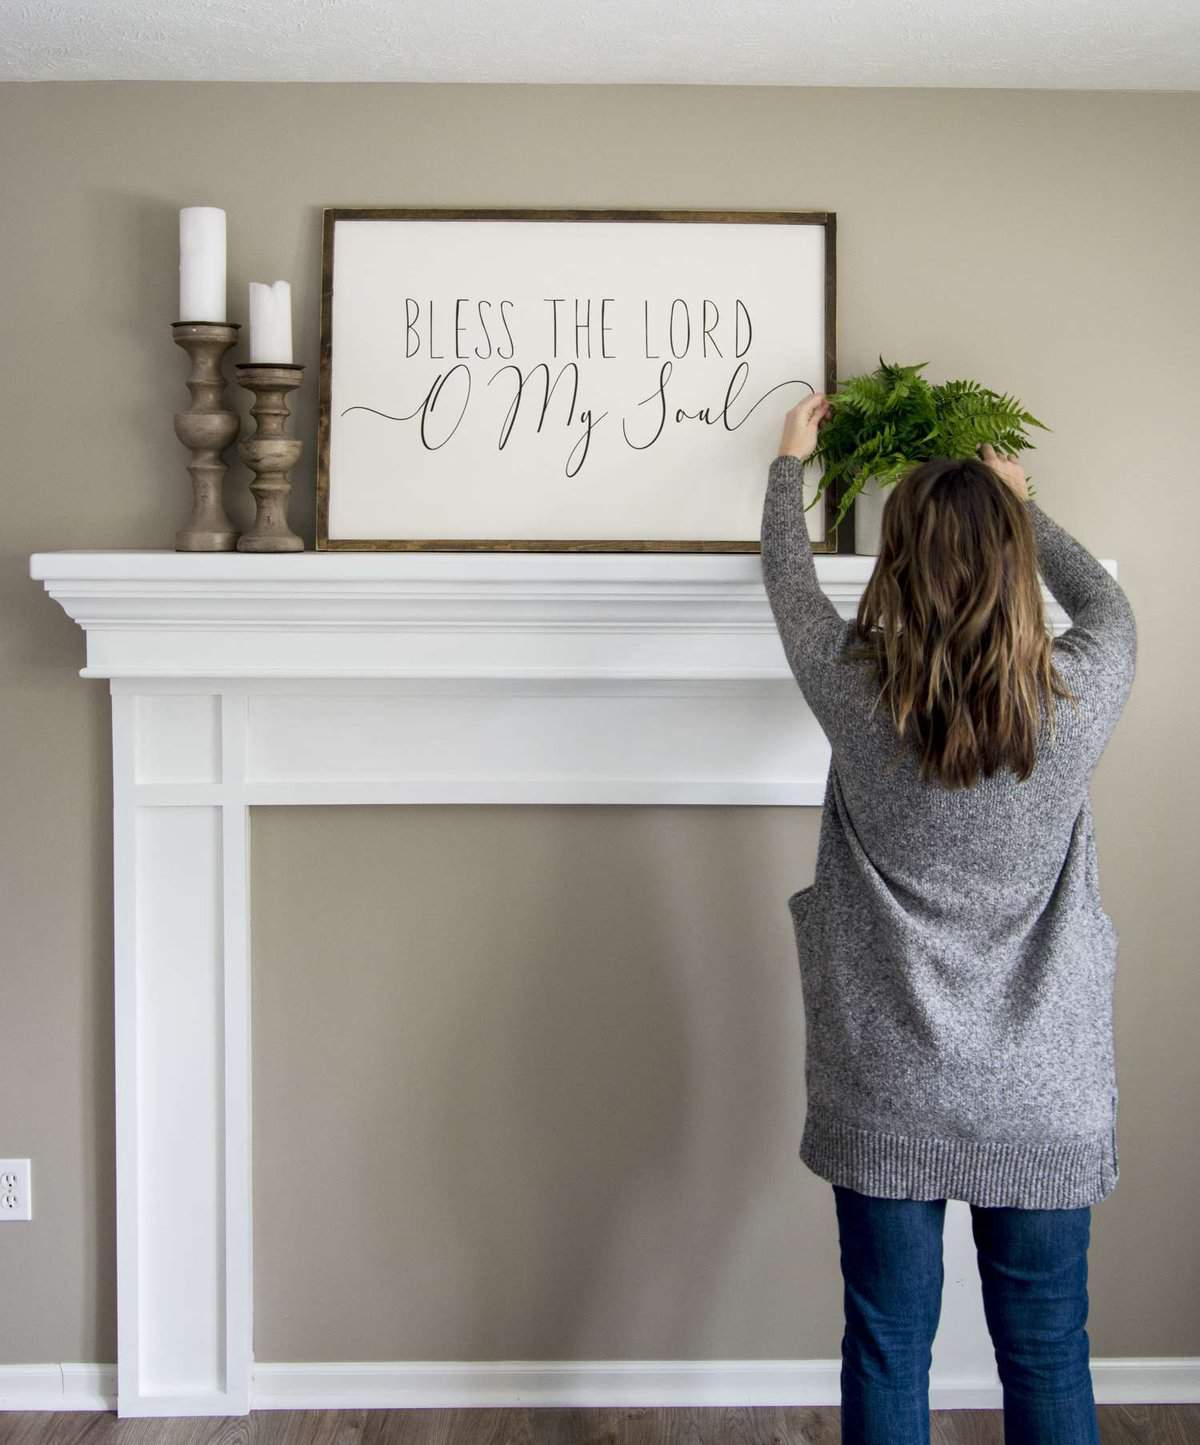 Adding a faux fireplace mantel instantly creates a focal point and cozy atmosphere in a room. Learn how to build a DIY fireplace mantel in any room!